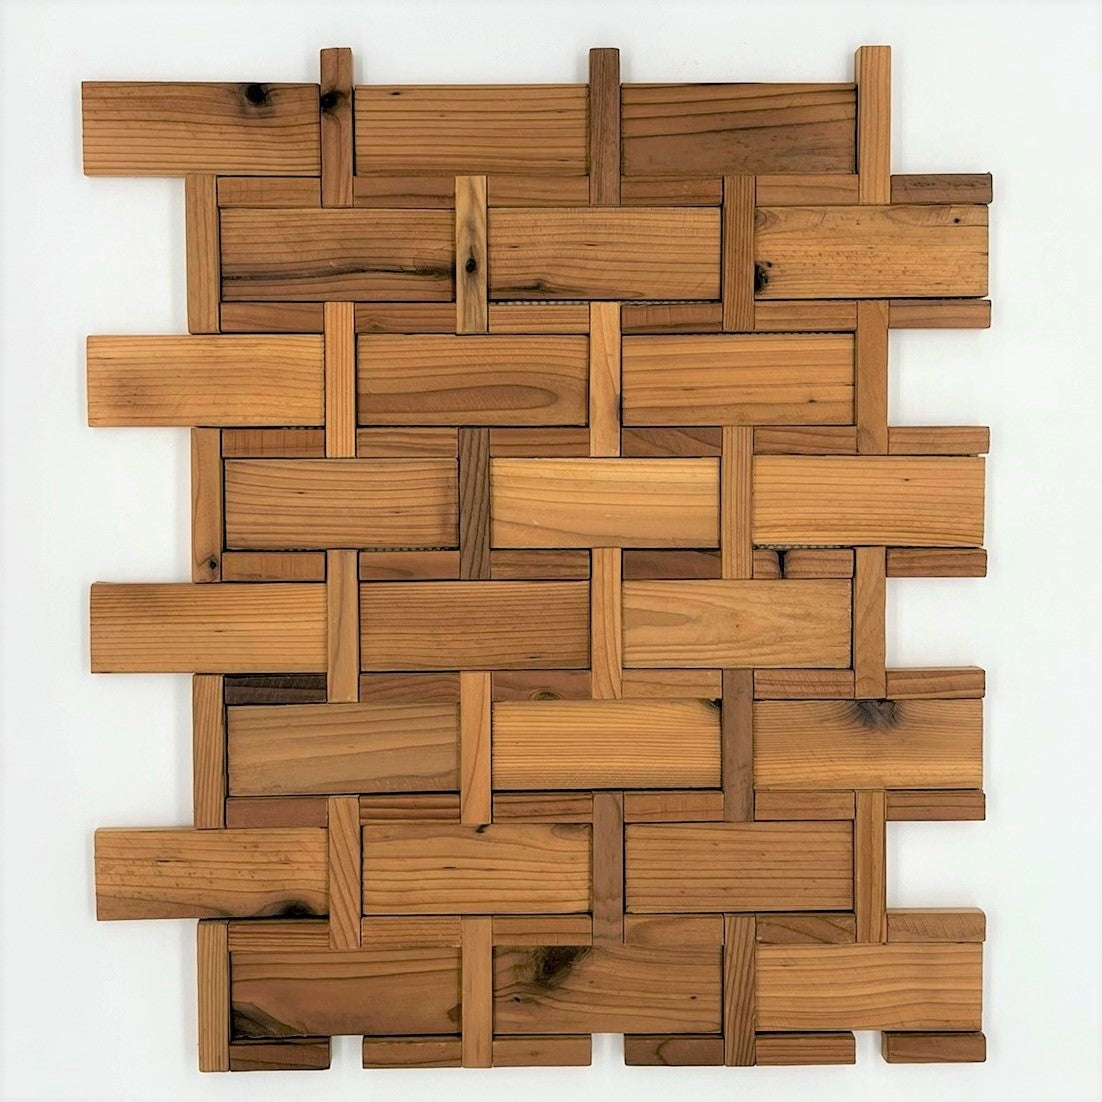 forest elements stereo puzzle 2 wood wall 3D mosaic natural pine accoustical decorative luxury interior distributed by surface group